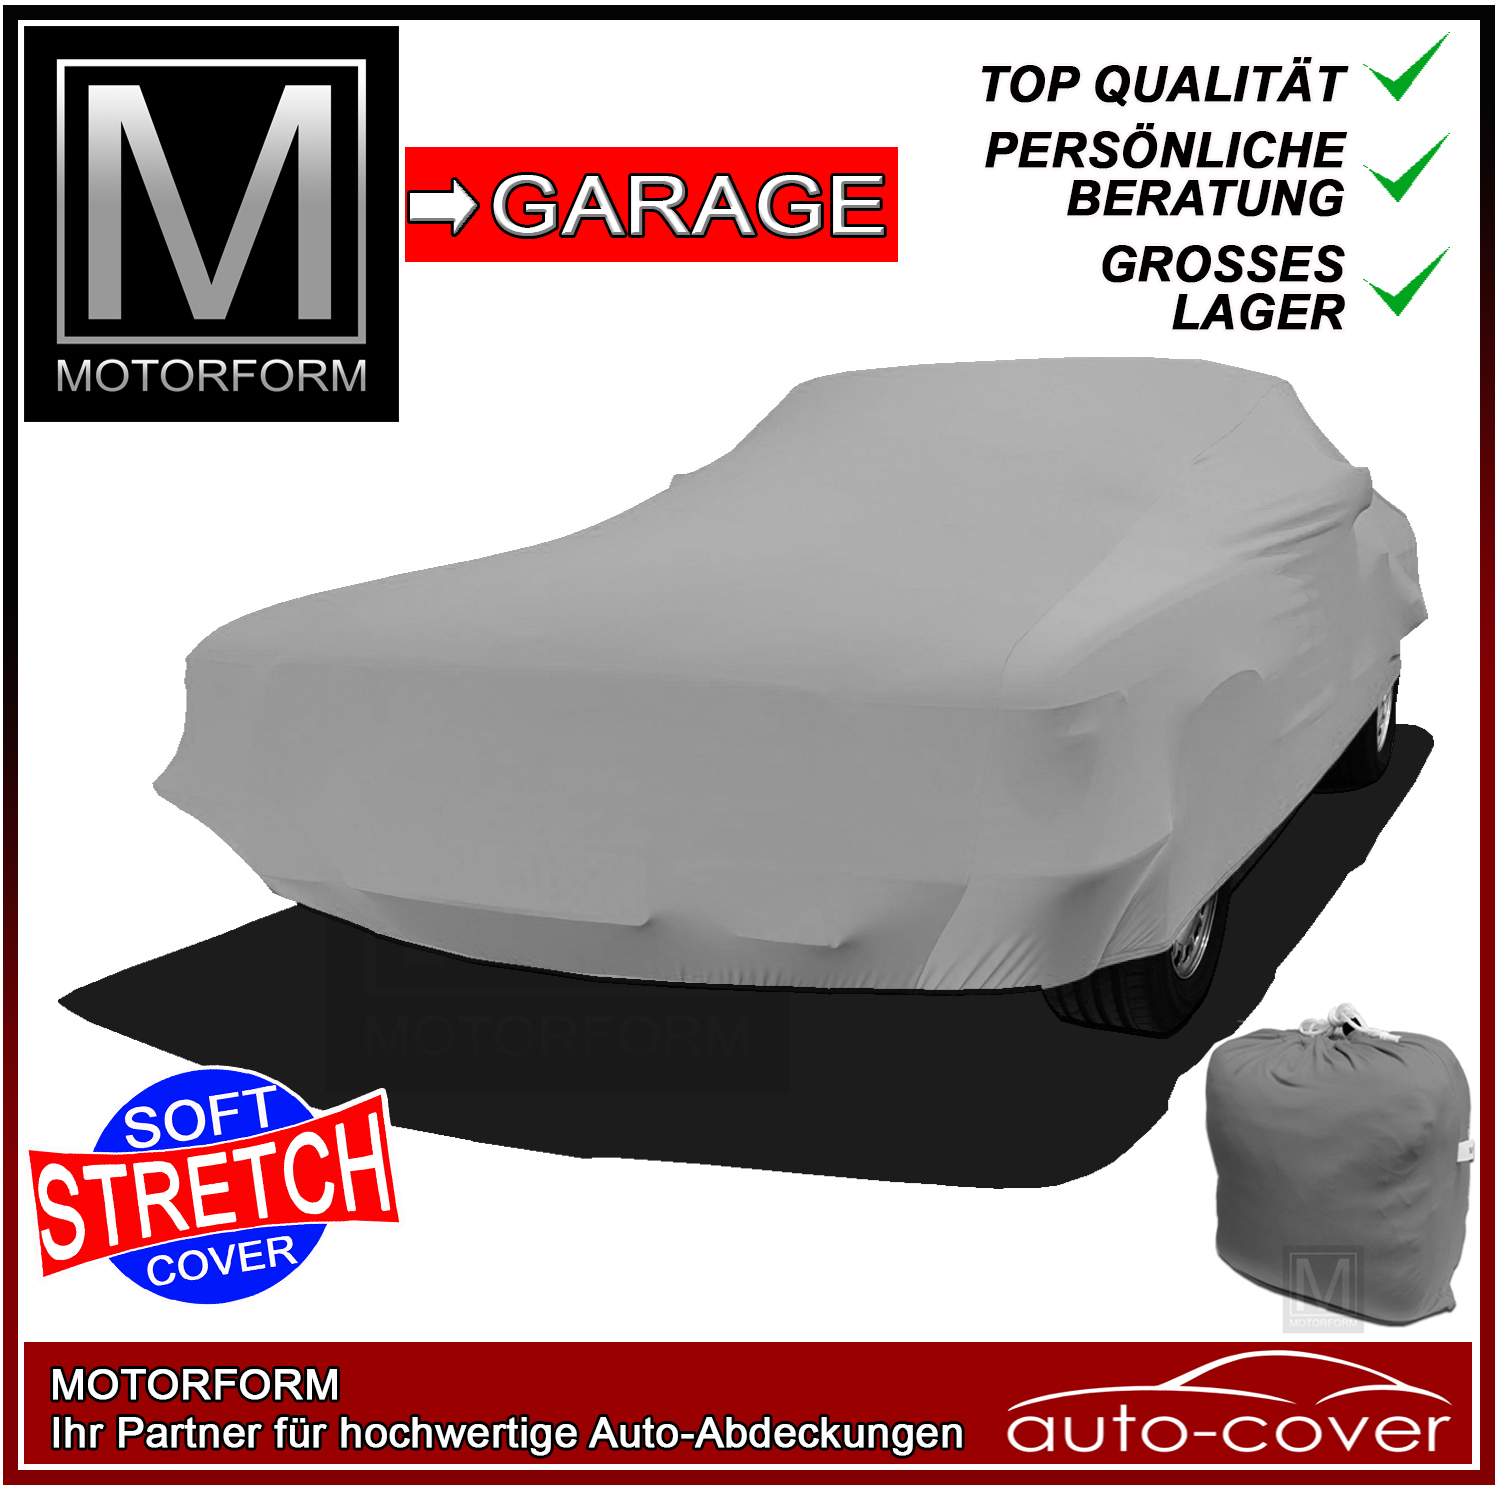 Grey Super Stretchy Cover for Cadillac Seville (1975-)